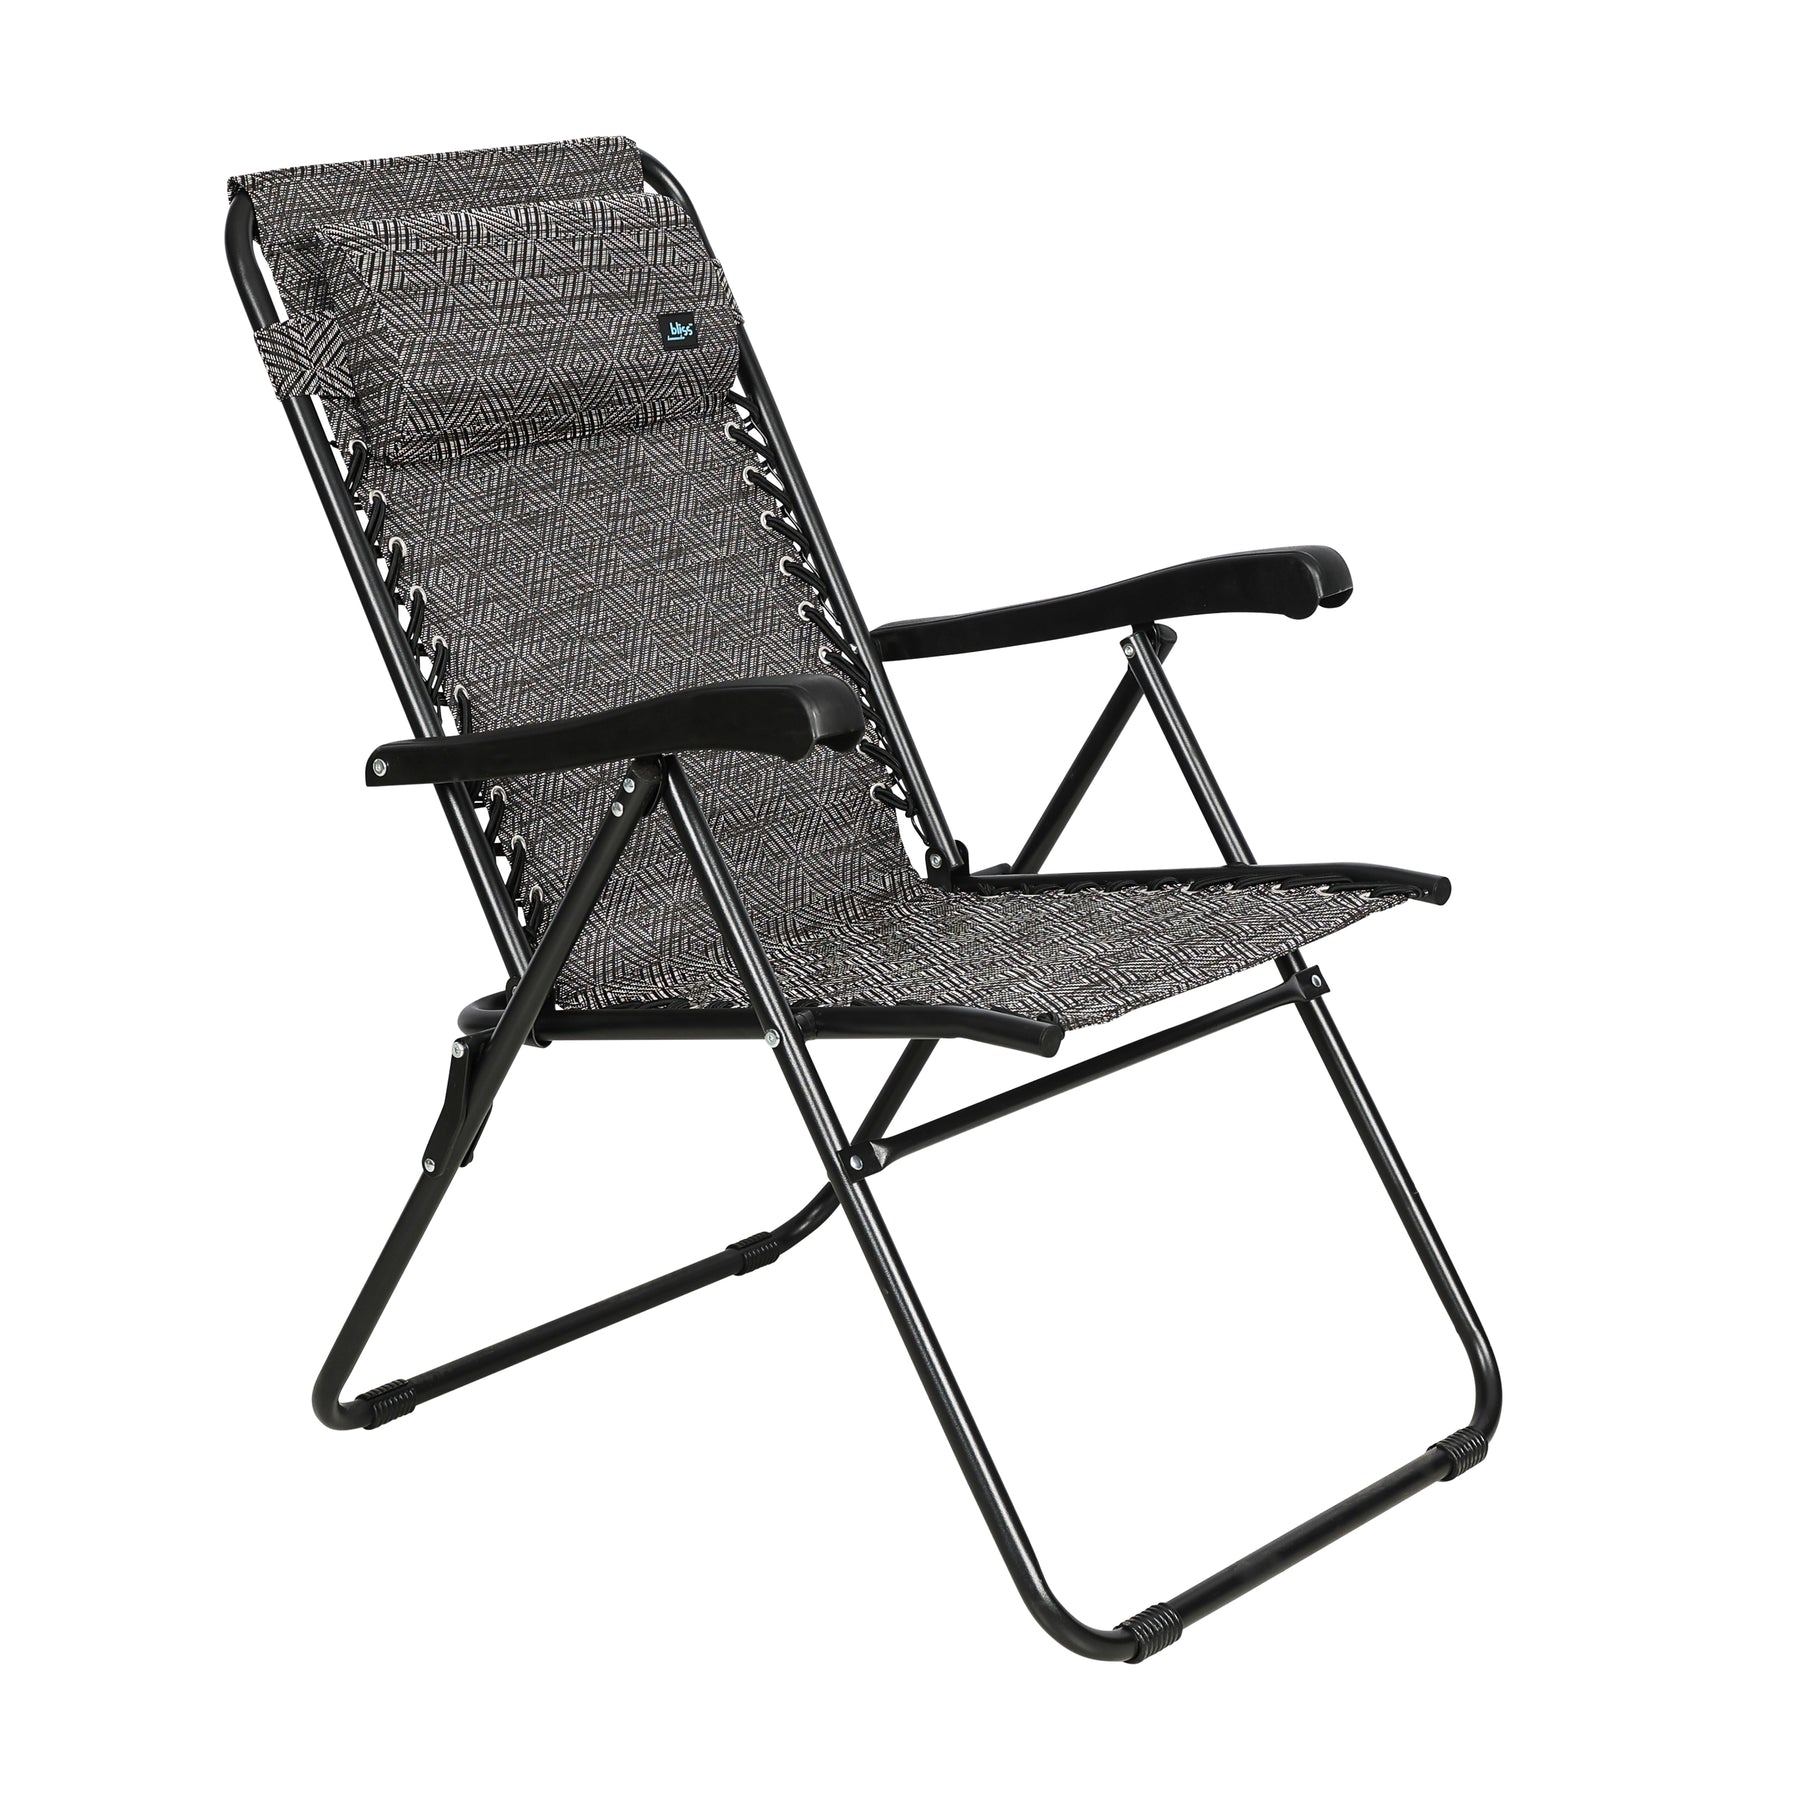 Bliss Hammocks 26-inch Wide Reclining Sling Chair with Pillow in the diamond jacquard variation: a gray color with a diamond jacquard pattern.